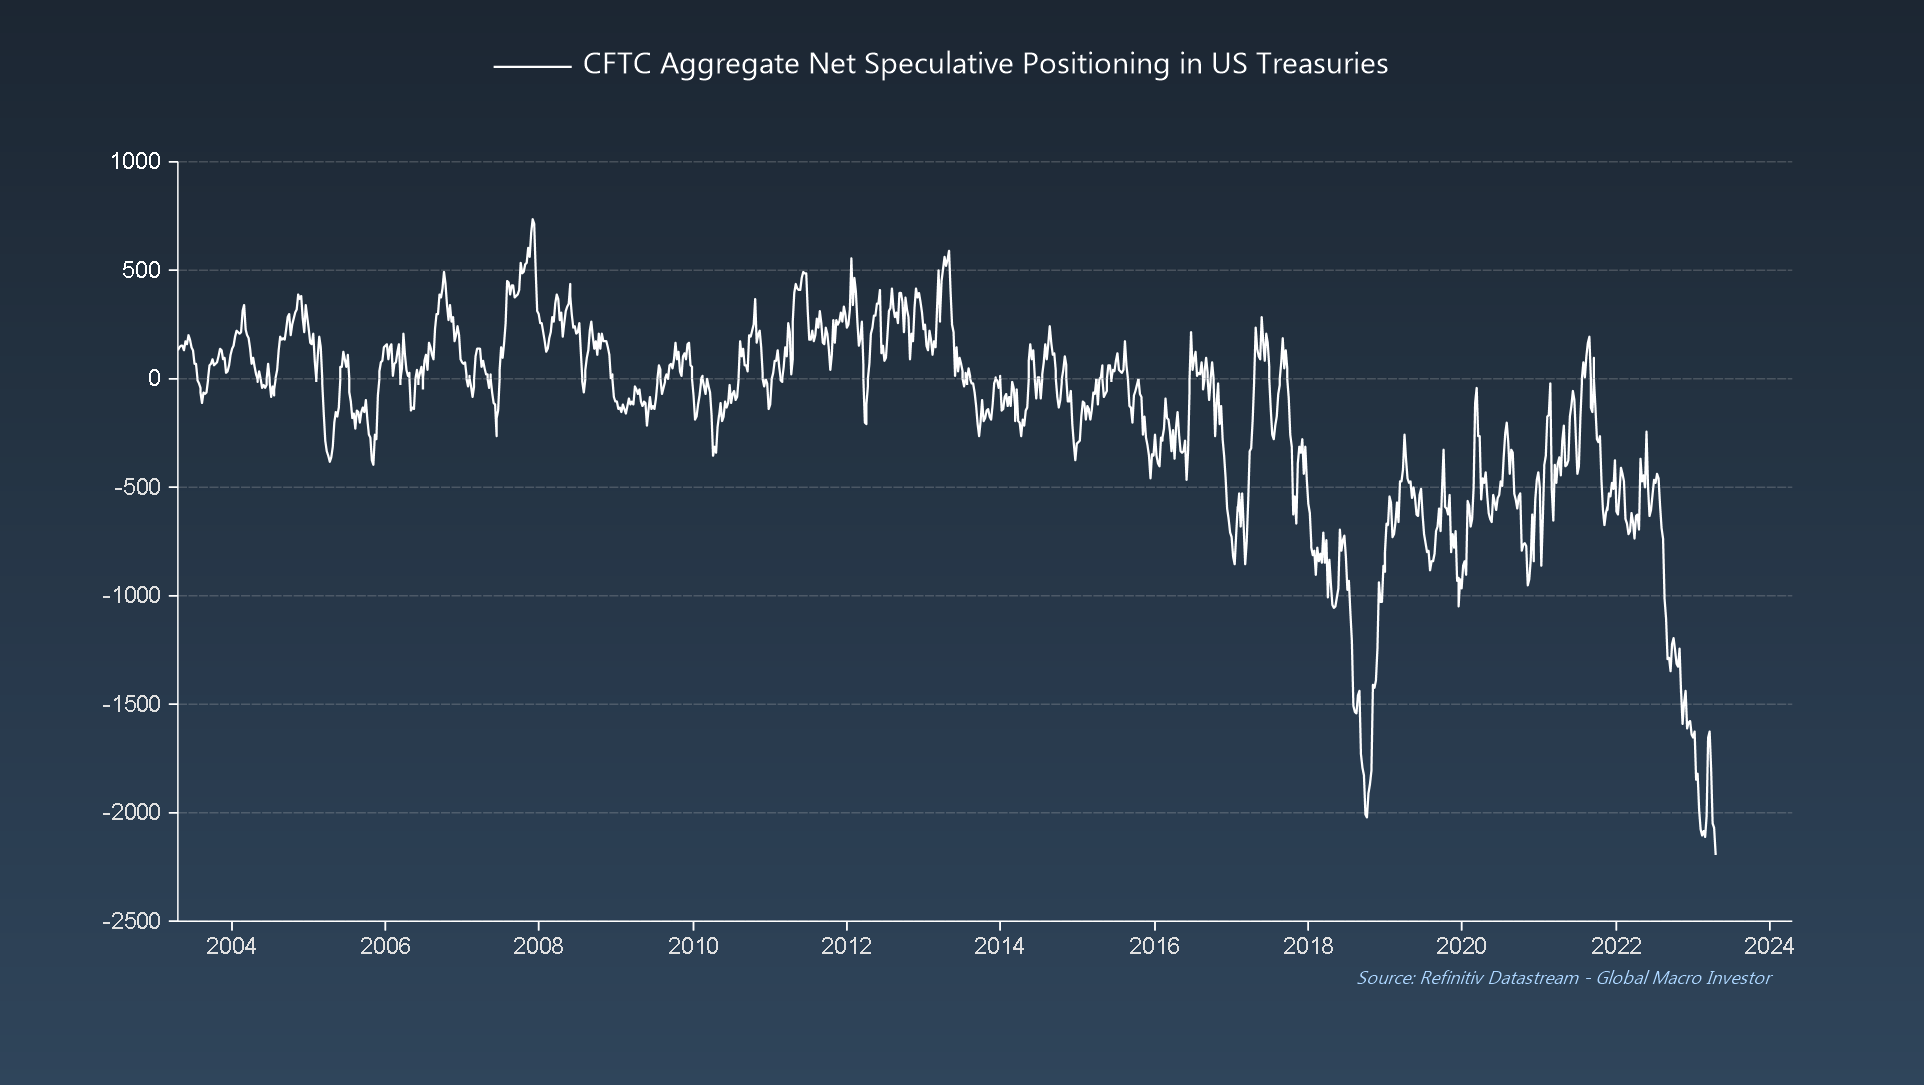 CFTC Aggregate Net Speculative Positioning in US Treasuries